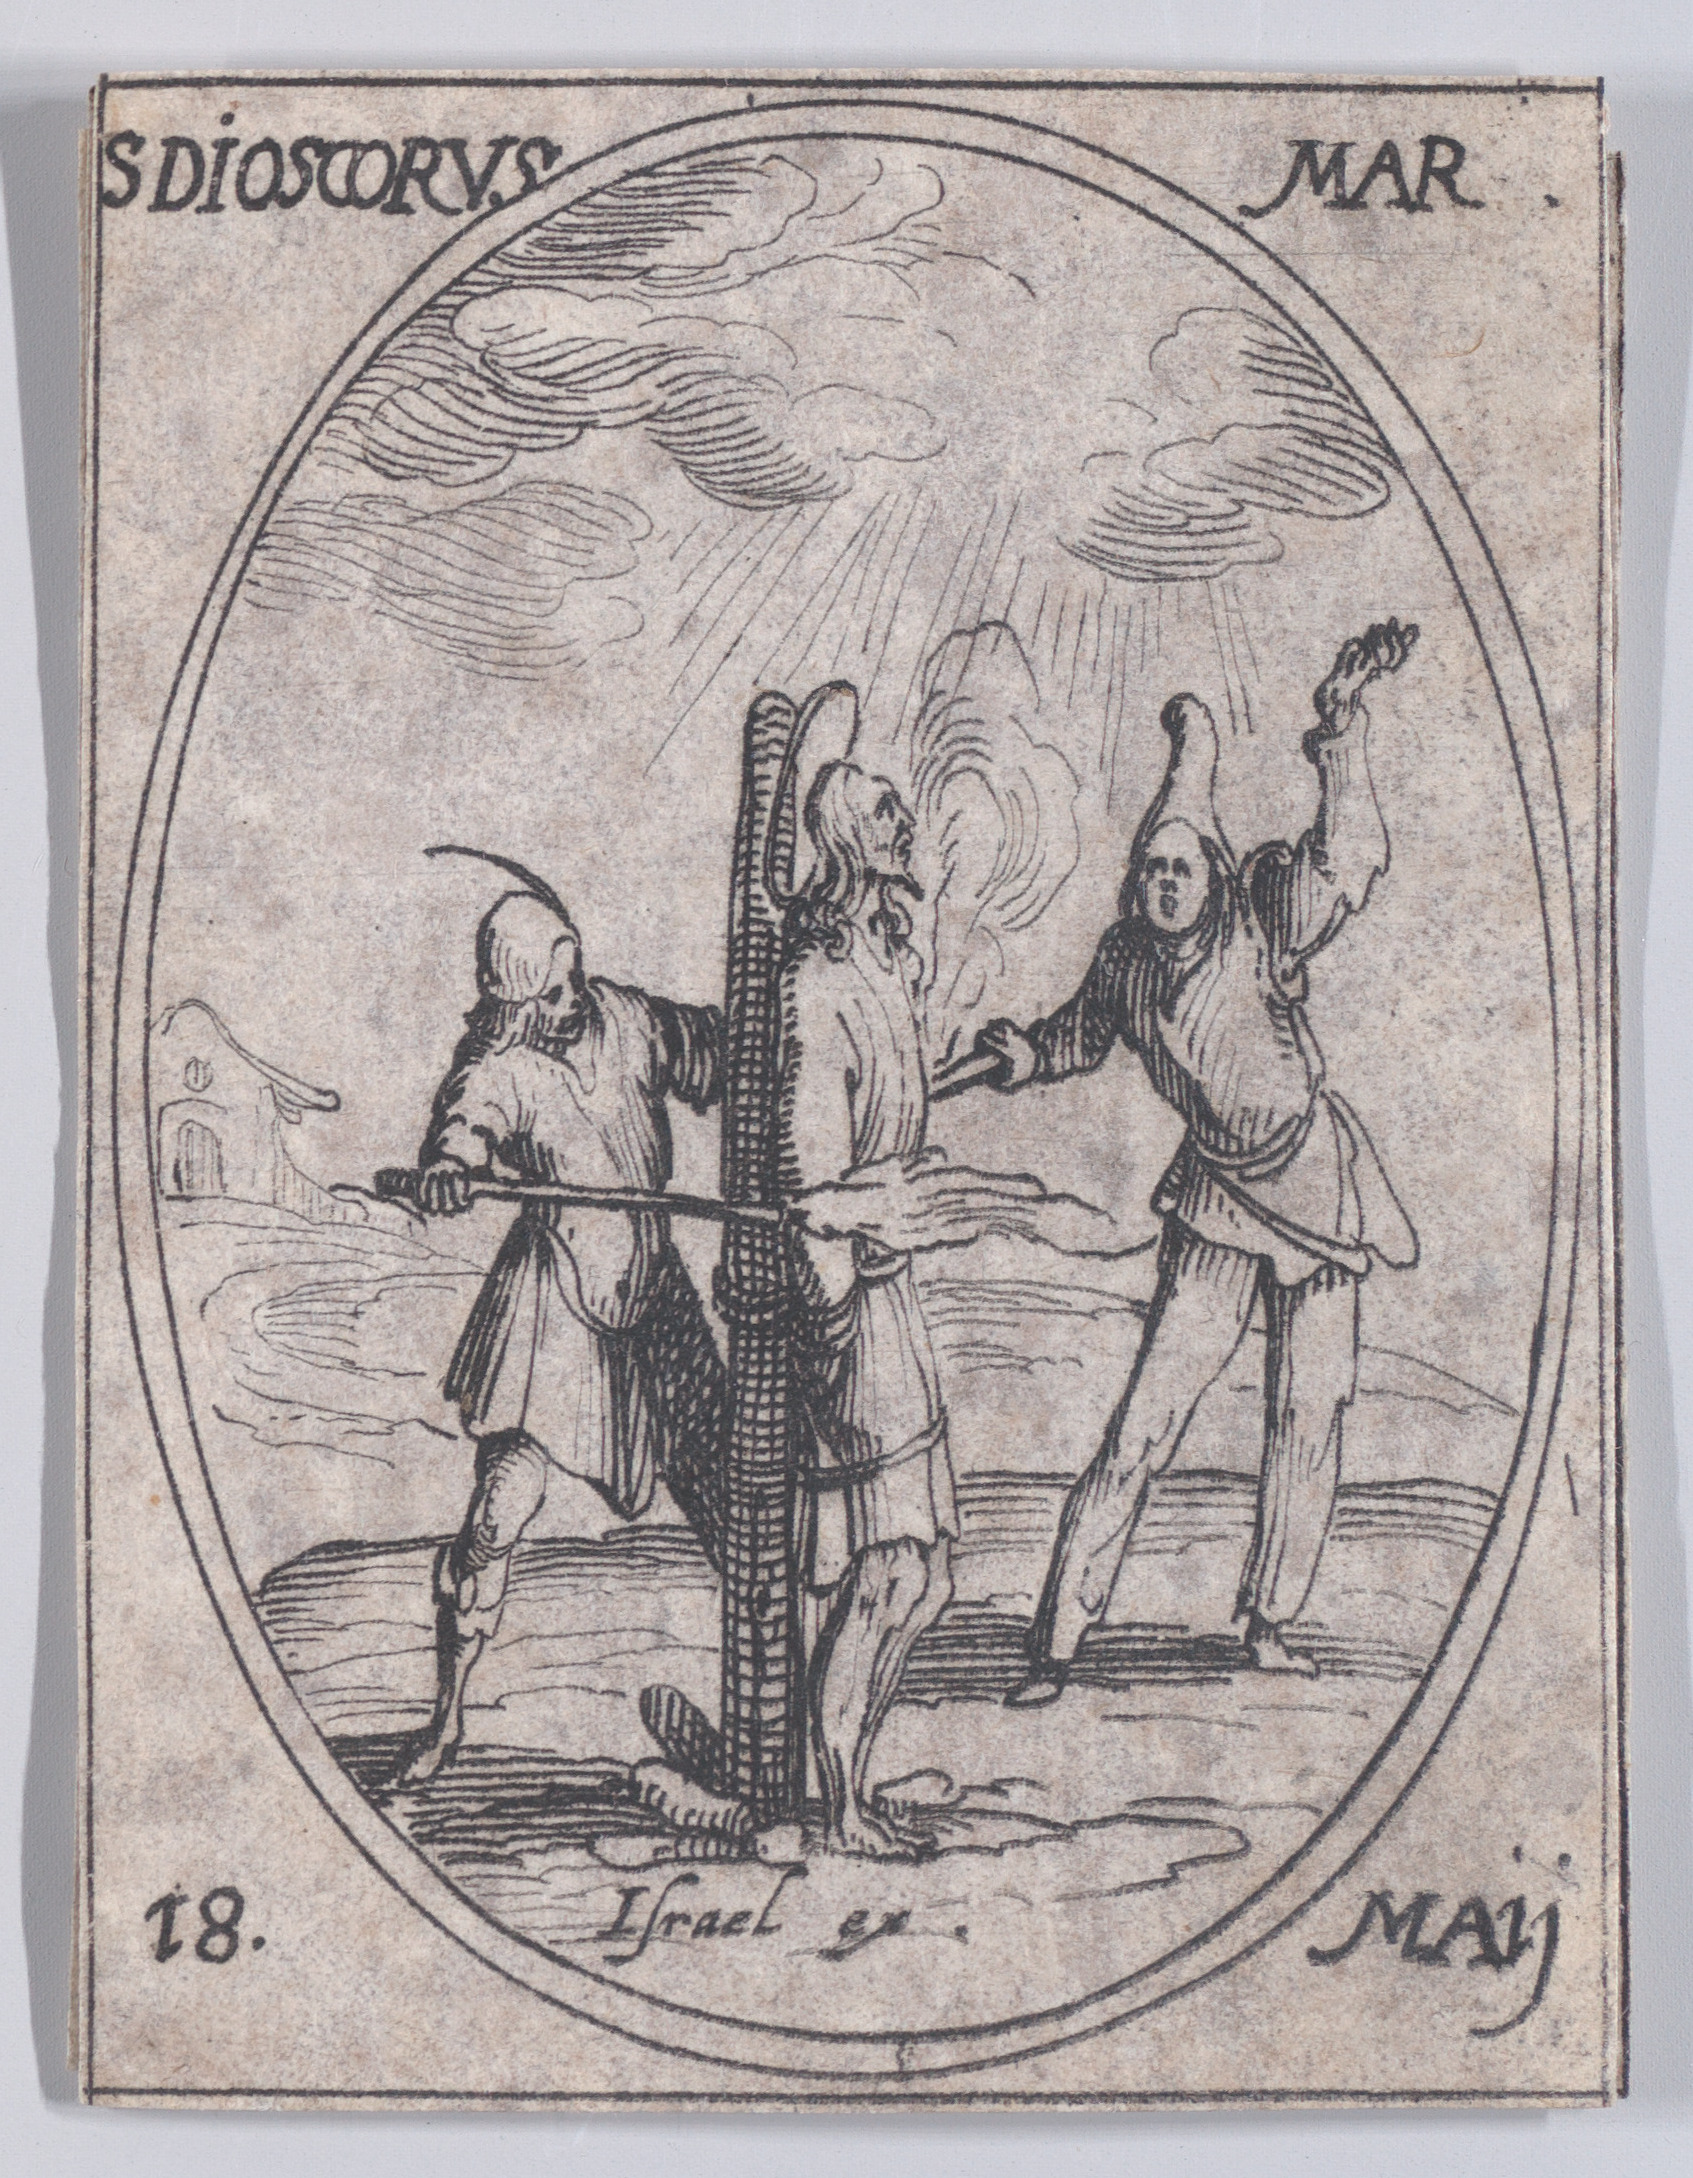 S. Discore, martyr (St. Discorus, Martyr), May 18th, from Les Images De Tous Les Saincts et Saintes de L'Année (Images of All of the Saints and Religious Events of the Year), Jacques Callot (French, Nancy 1592–1635 Nancy), Etching; second state of two (Lieure)